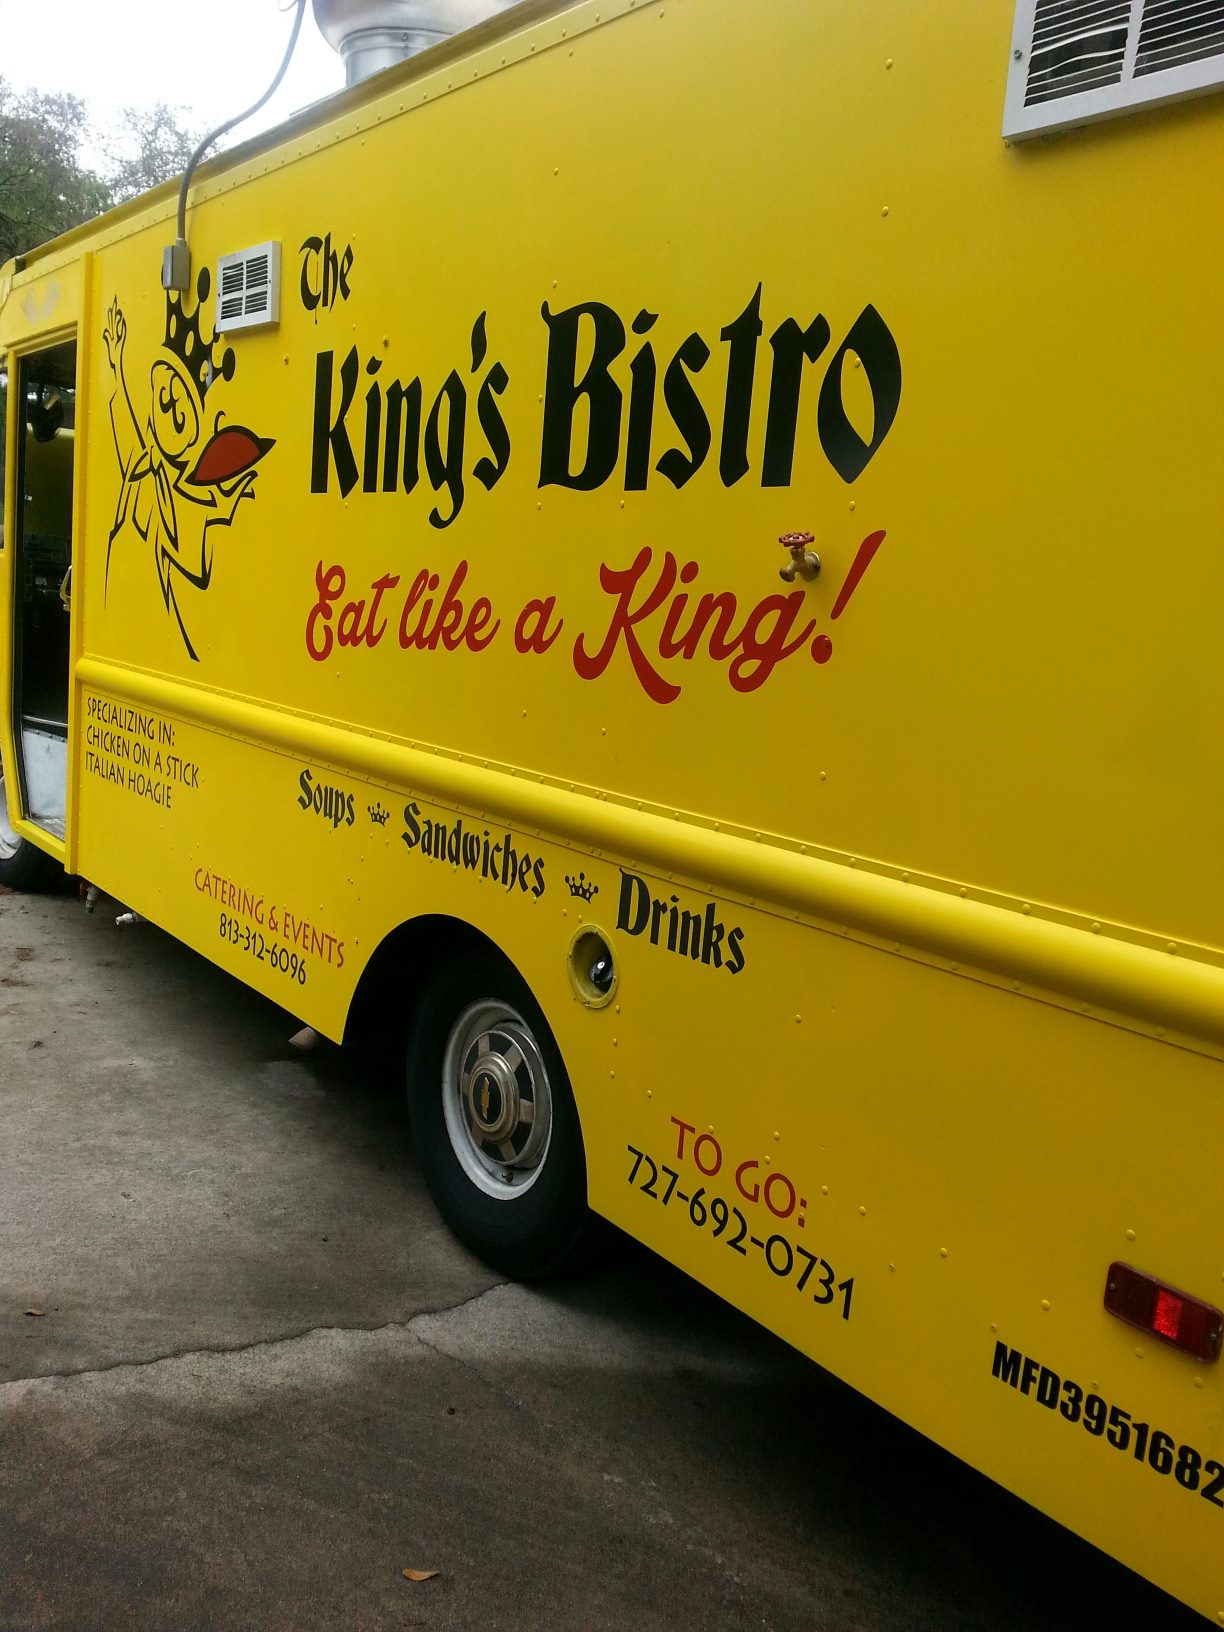 The King's Bistro Food Truck